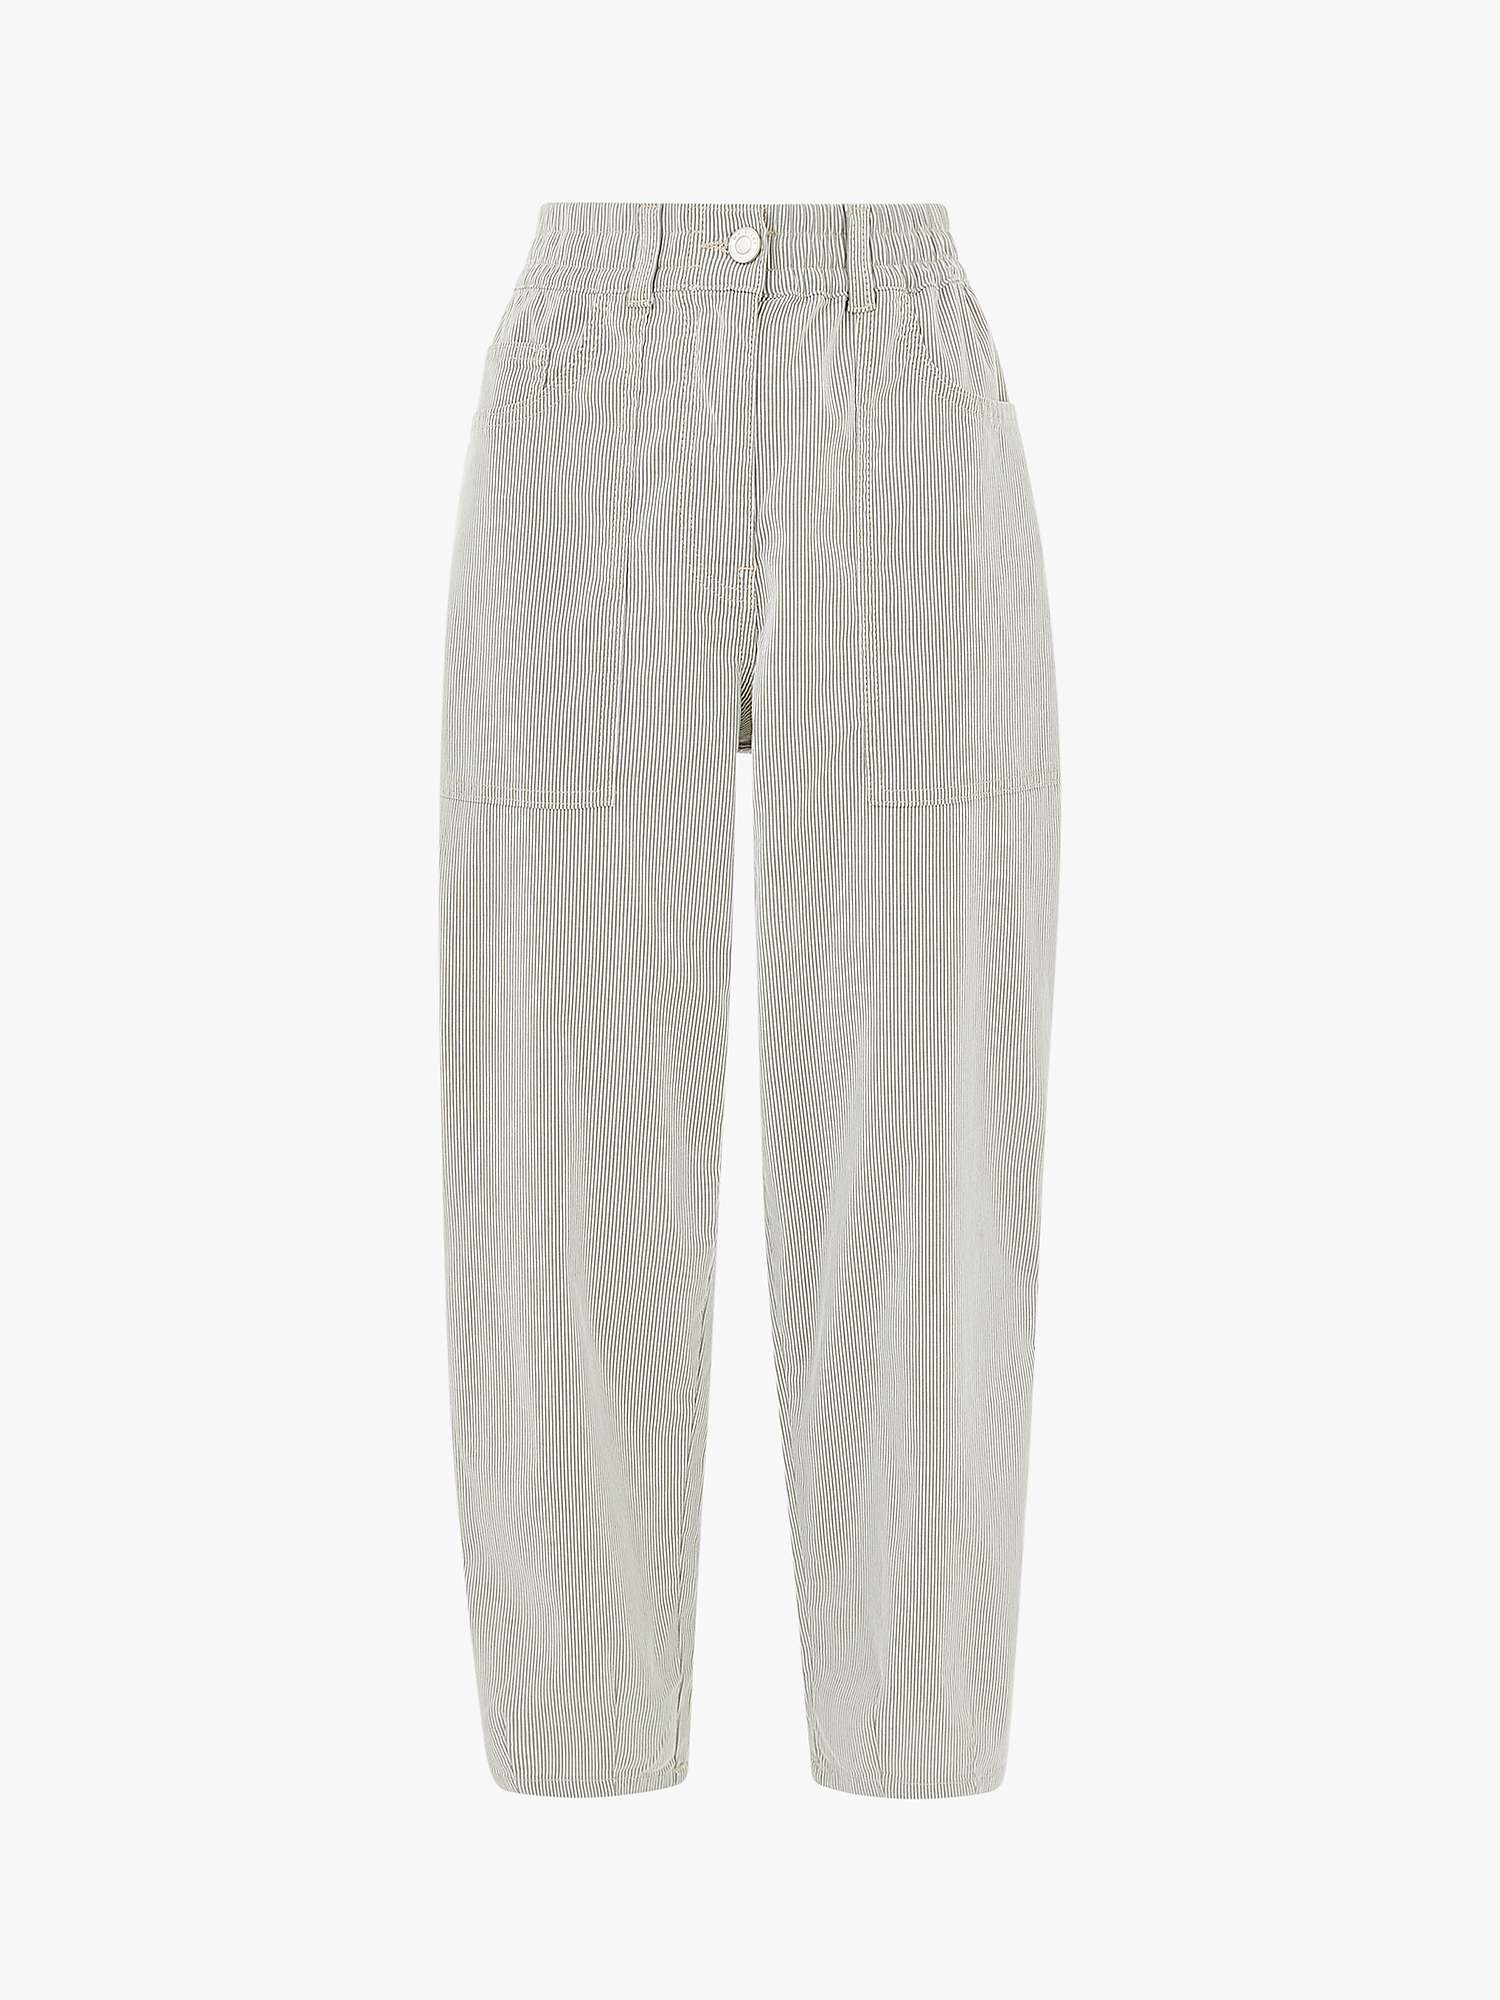 Buy Whistles Tessa Stripe Casual Trousers, Grey Online at johnlewis.com